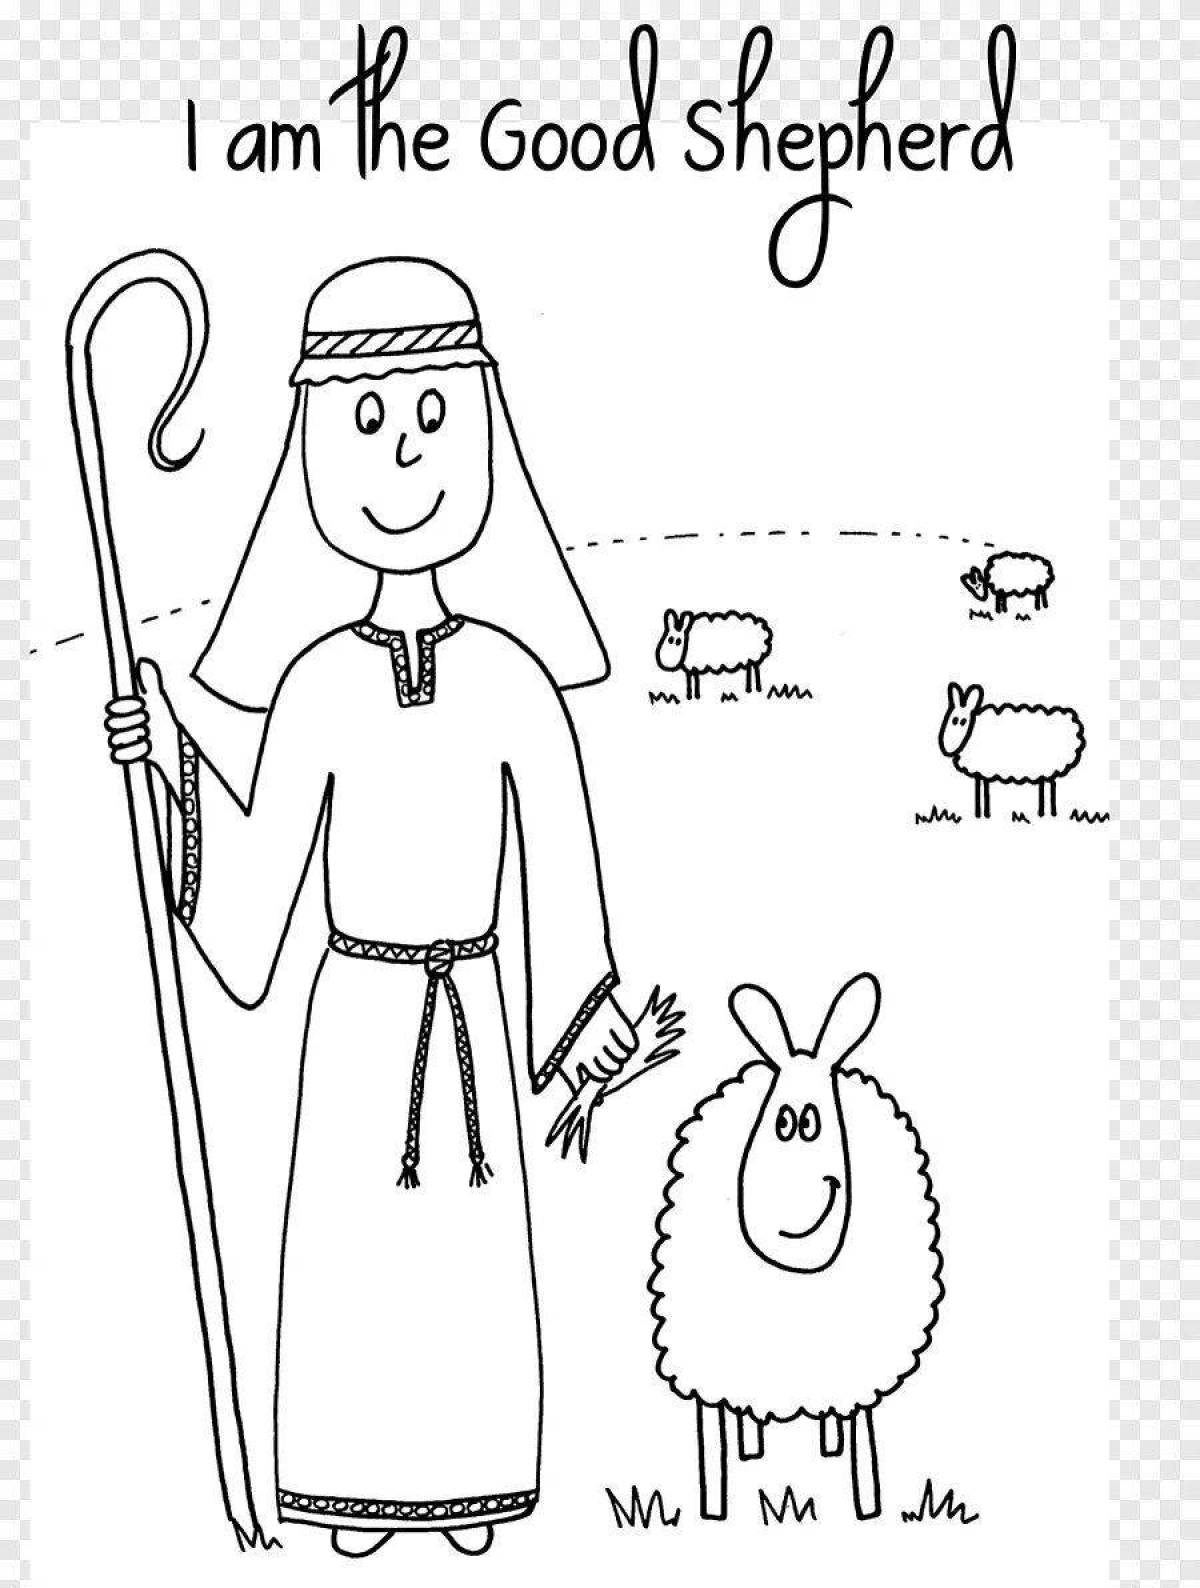 Majestic sheepdog coloring page